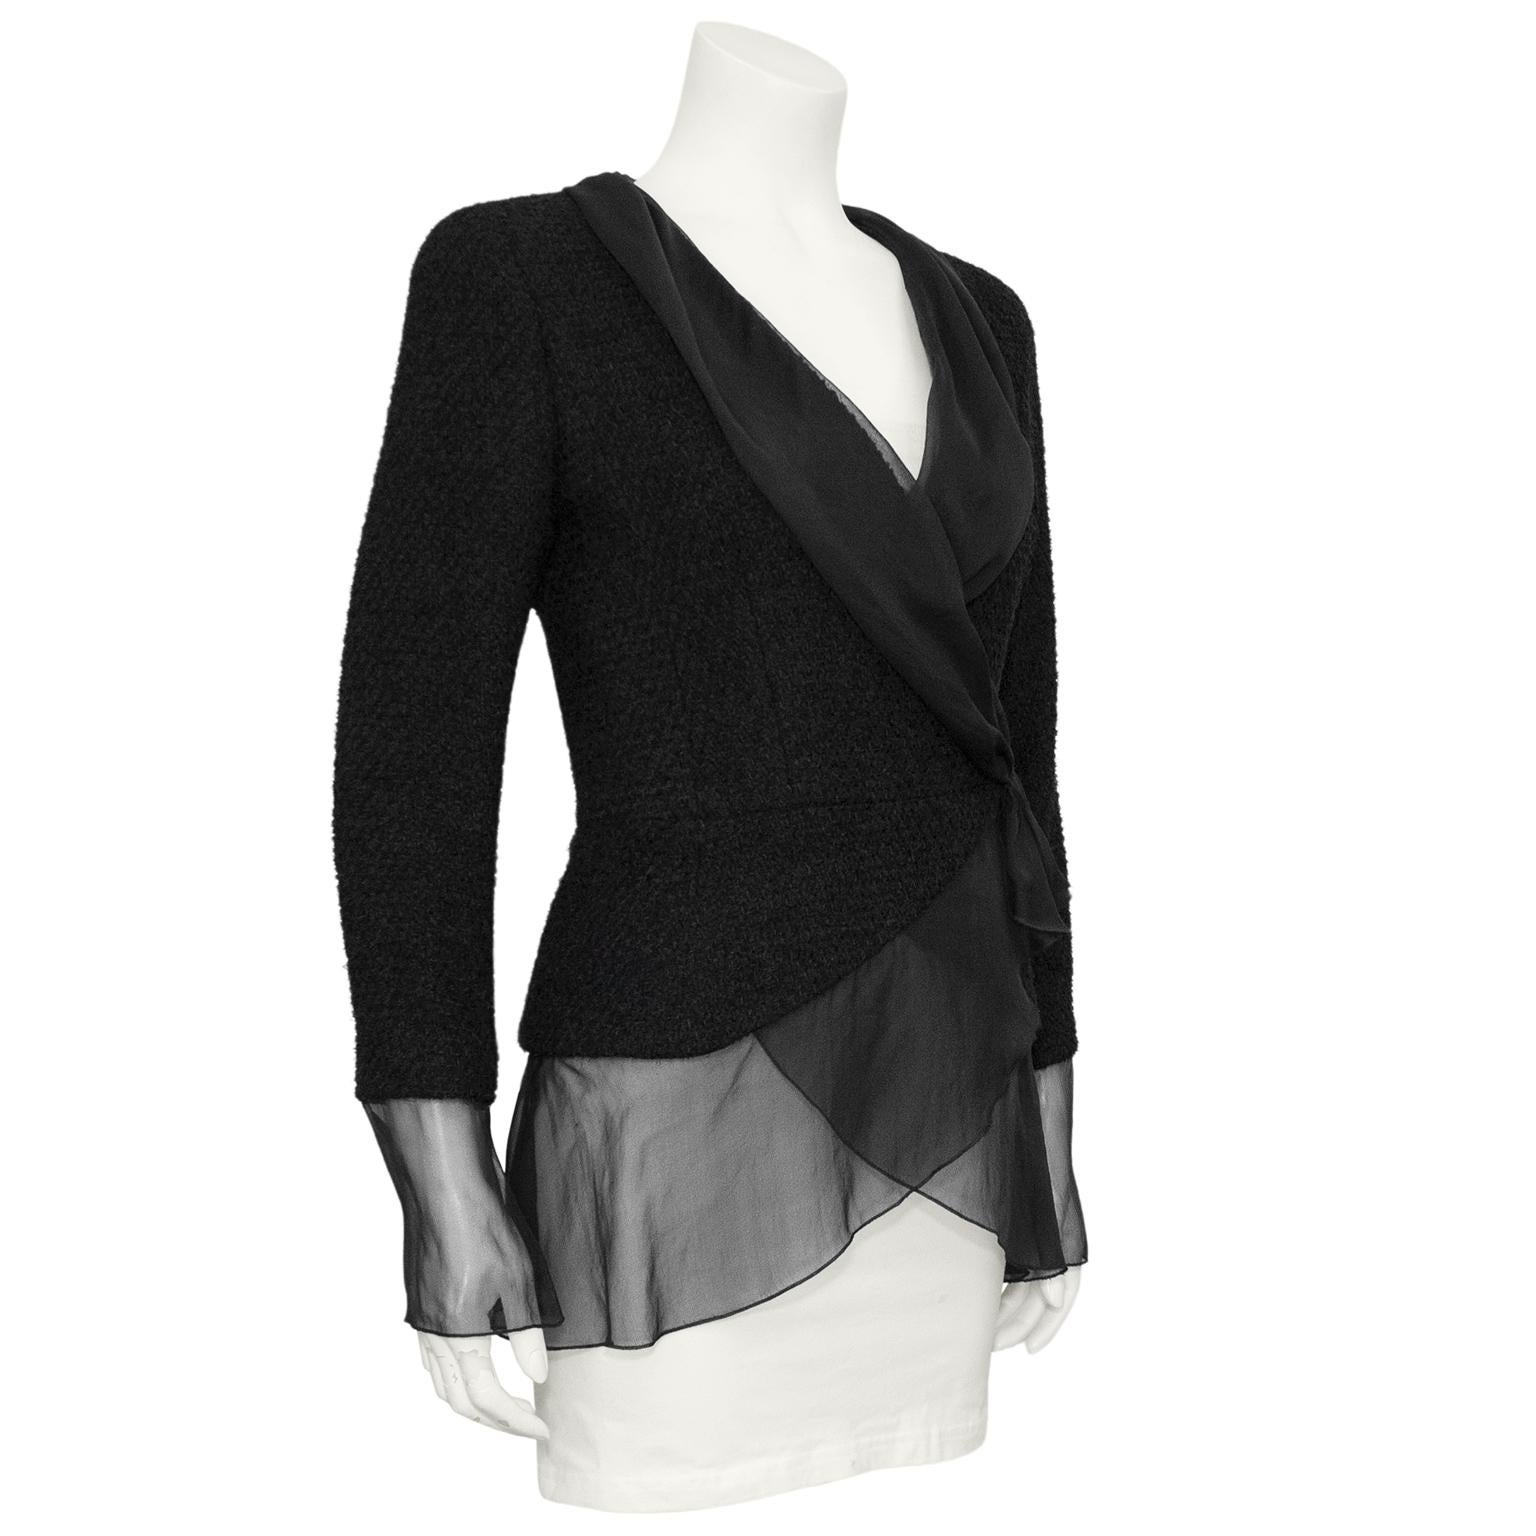 From the 2000 Transition collection, this black Chanel blazer features chiffon trim, cuffs and tuxedo style lapel. The black boucle body is fitted in the arms and nips in at the waist. Fastens at the navel with a hidden hook and eye and snap. In